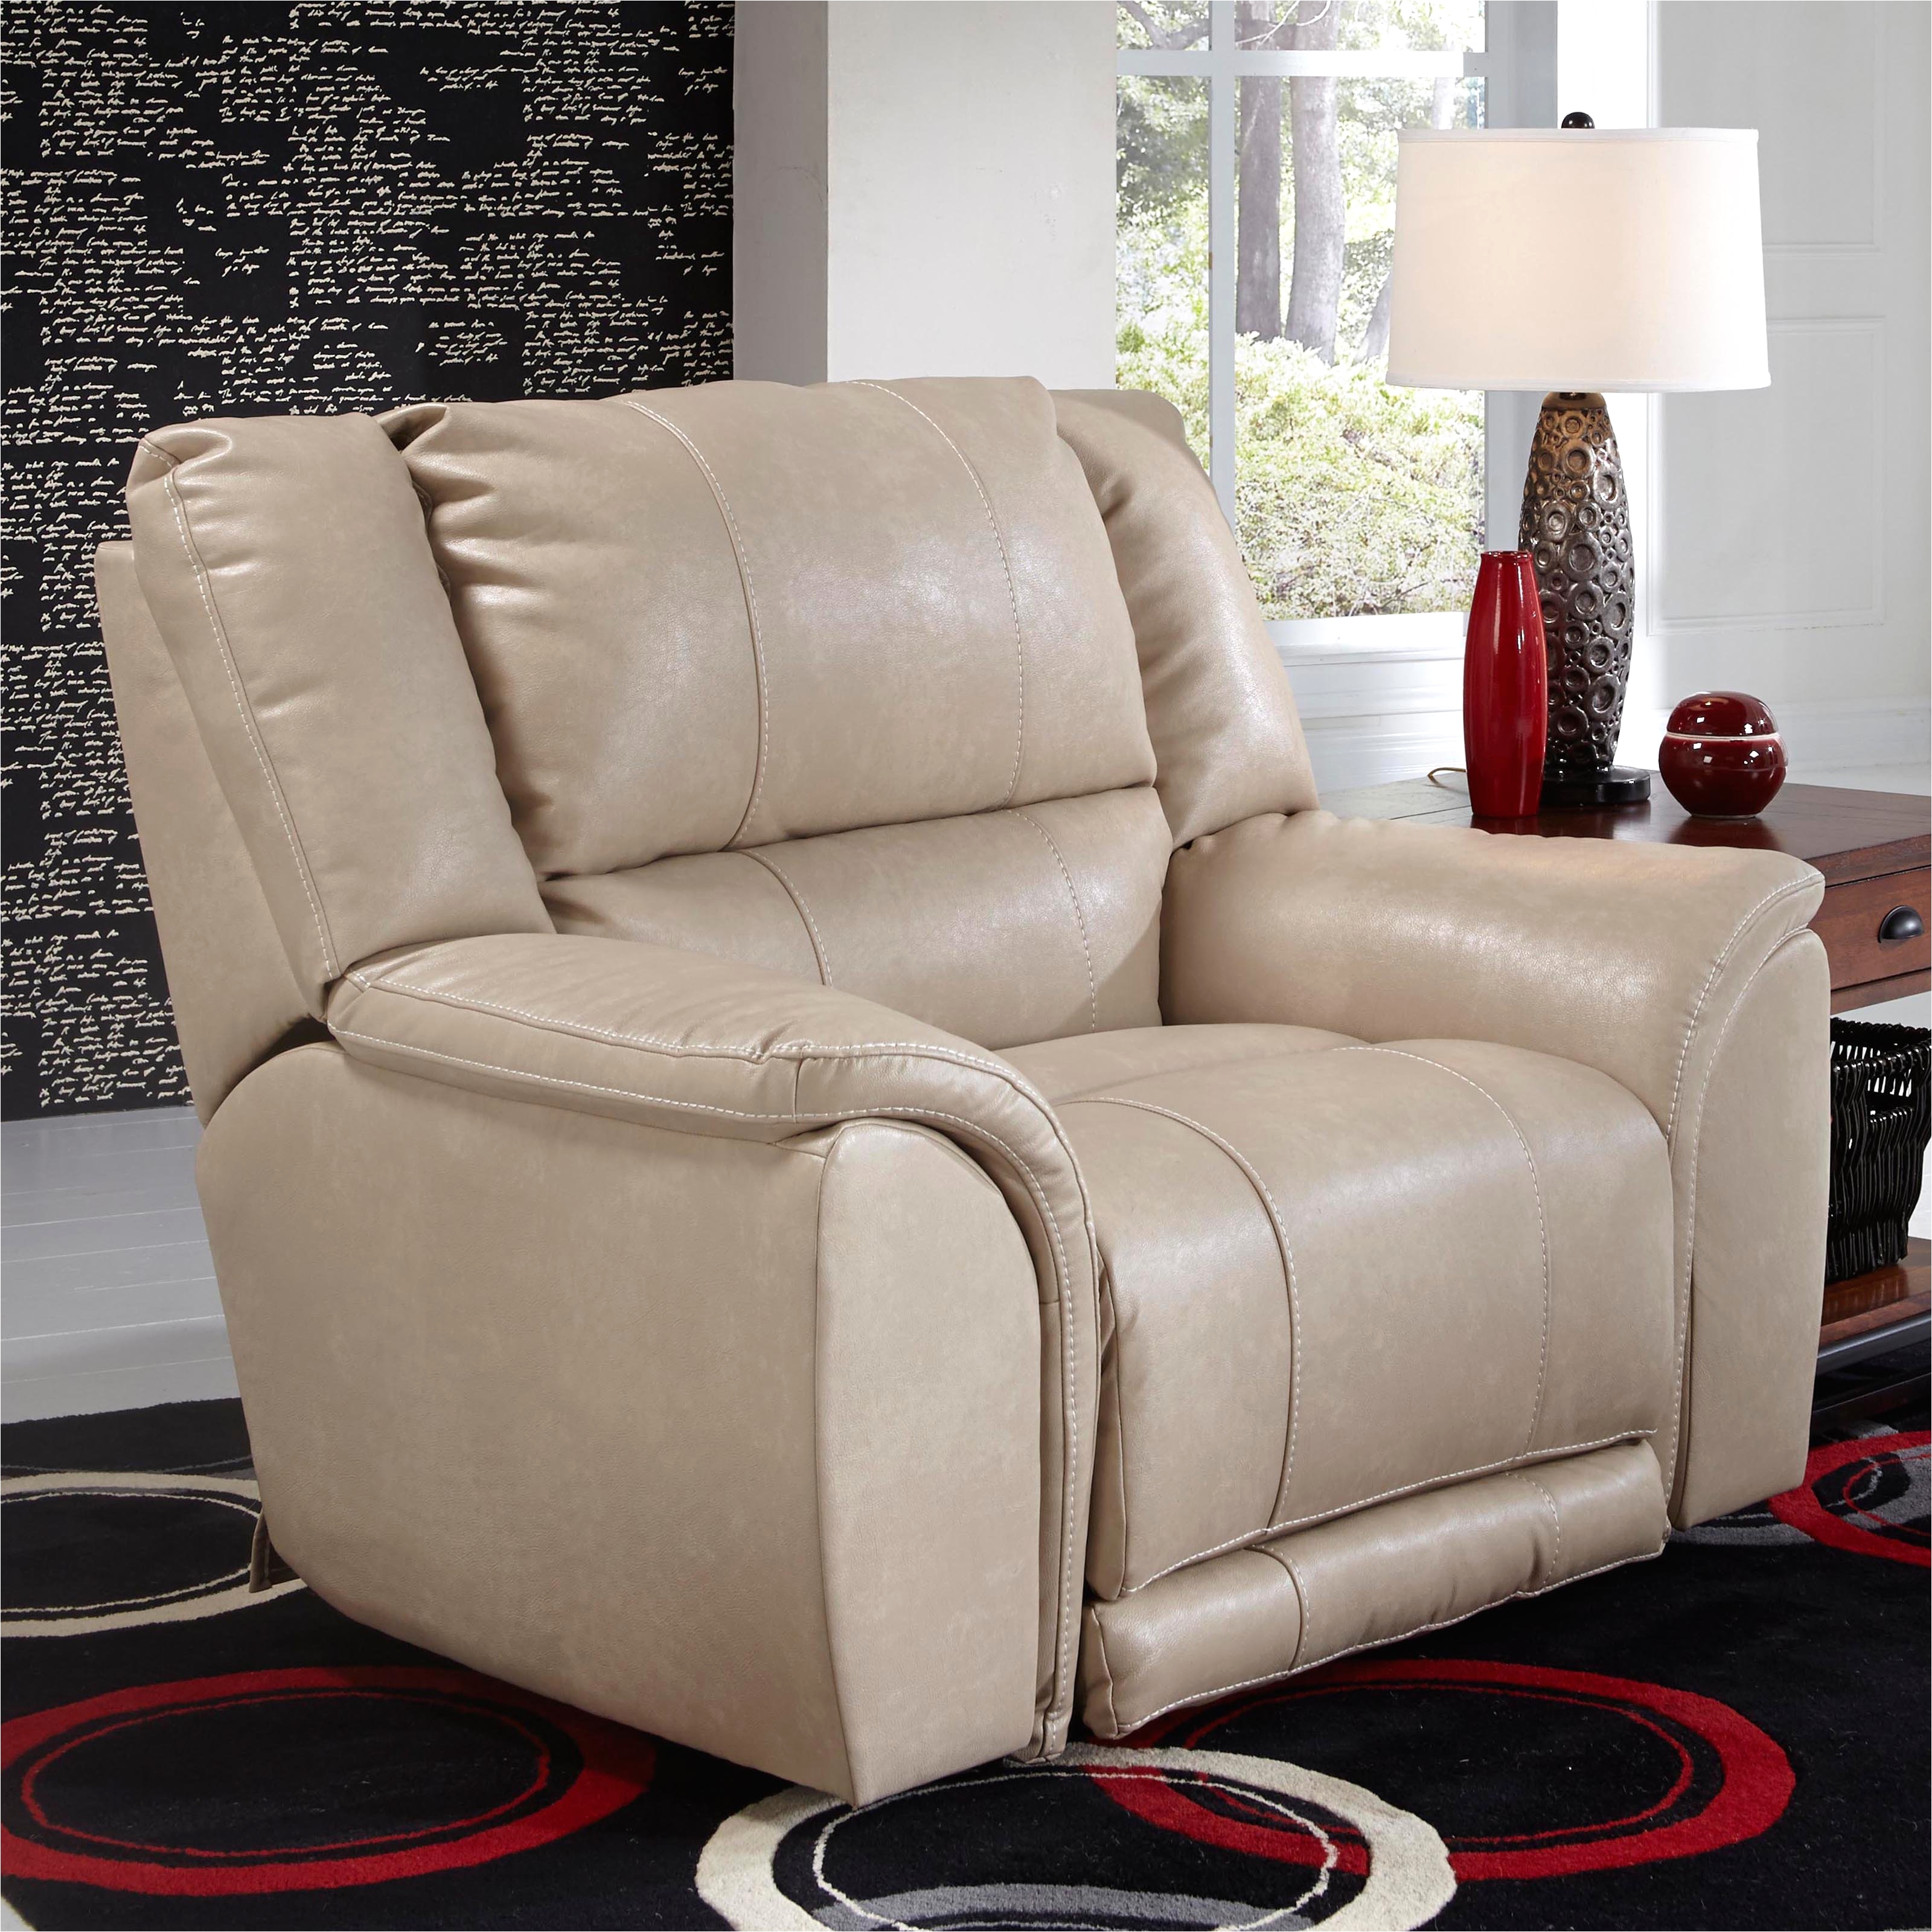 Lay Flat Recliner Chairs Uk 50 Awesome Lay Flat Reclining sofa Images 50 Photos Home Improvement